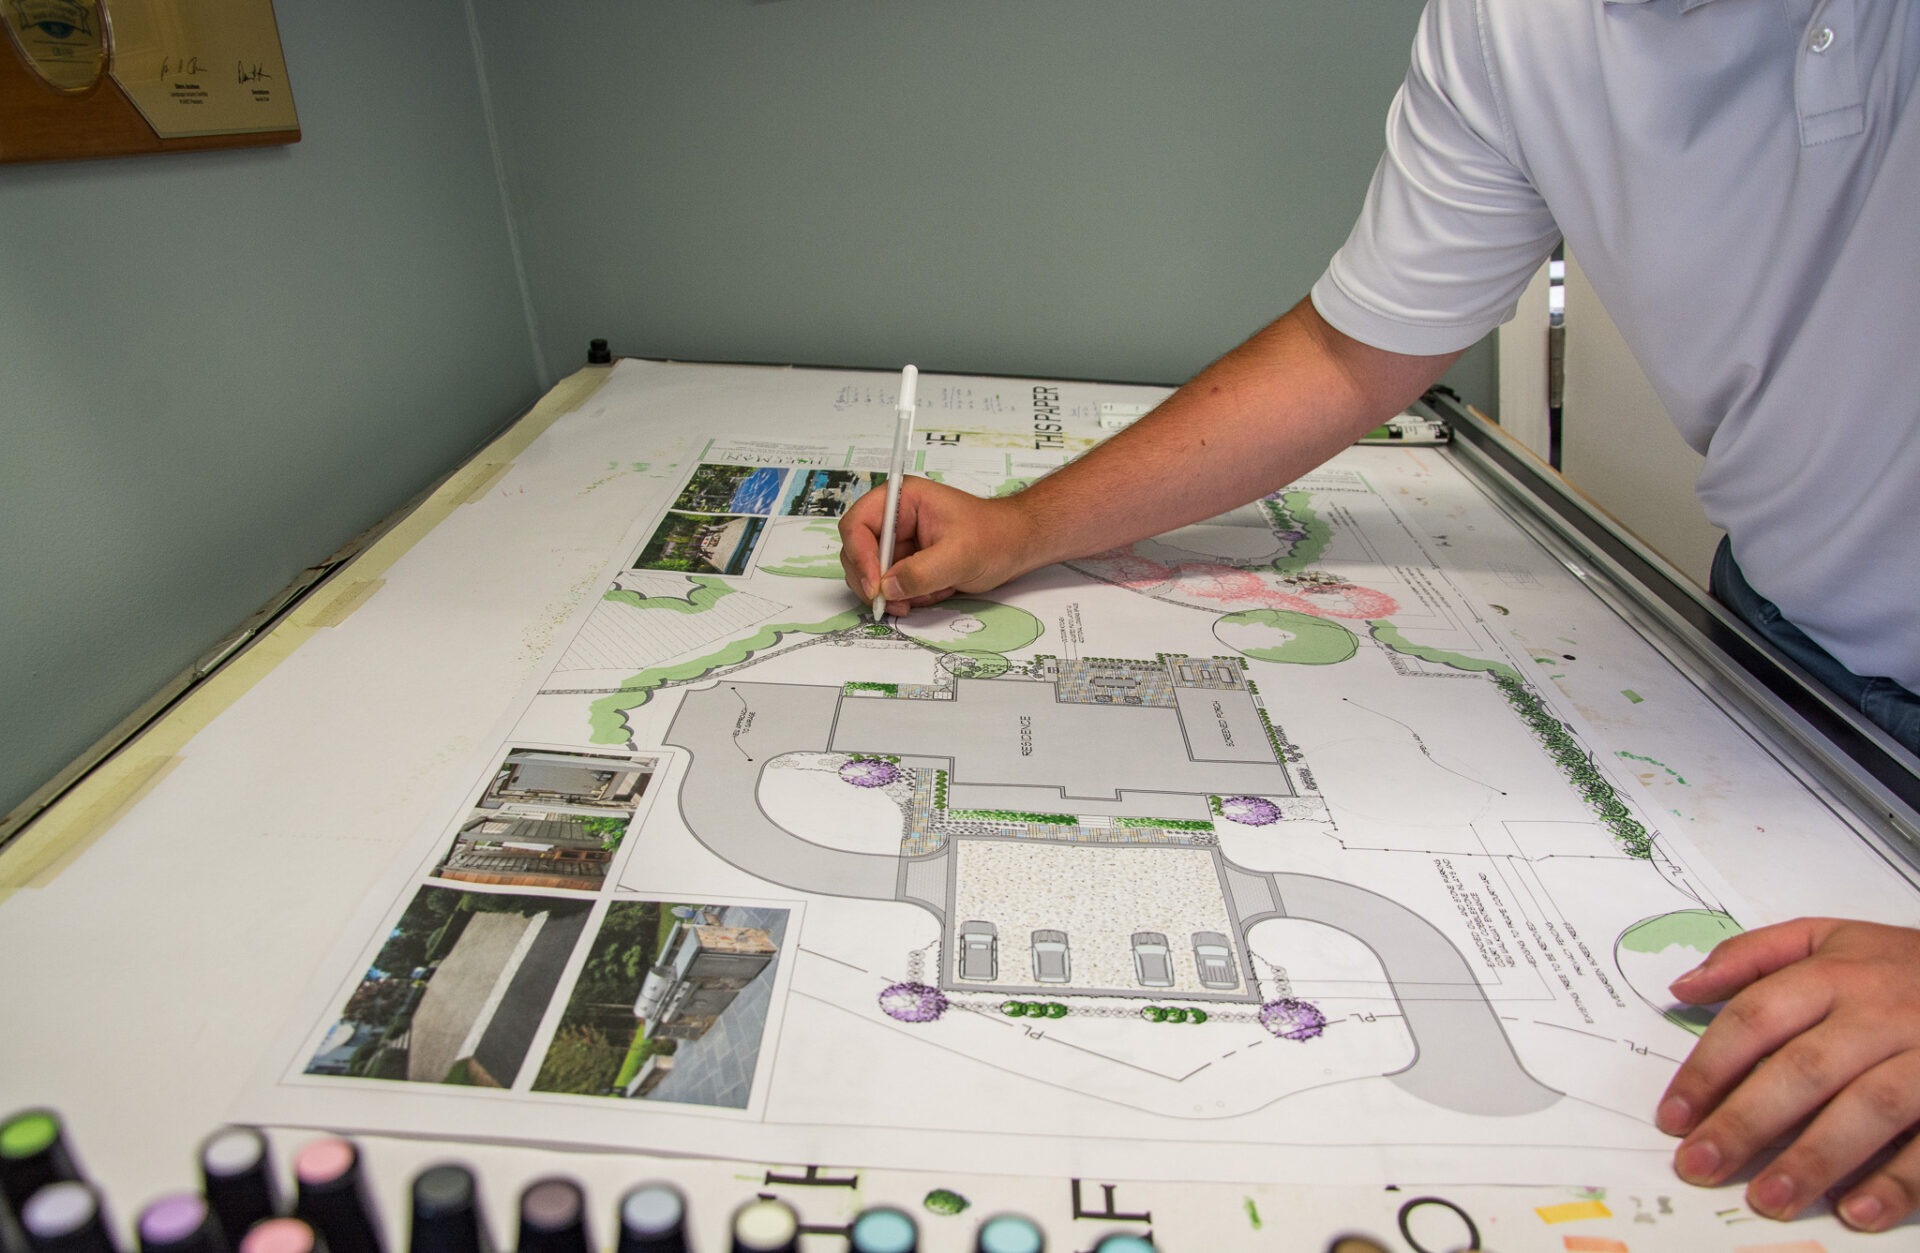 A person is drawing on a landscape design plan with colored markers. Various architectural details and reference photos are visible on the layout.